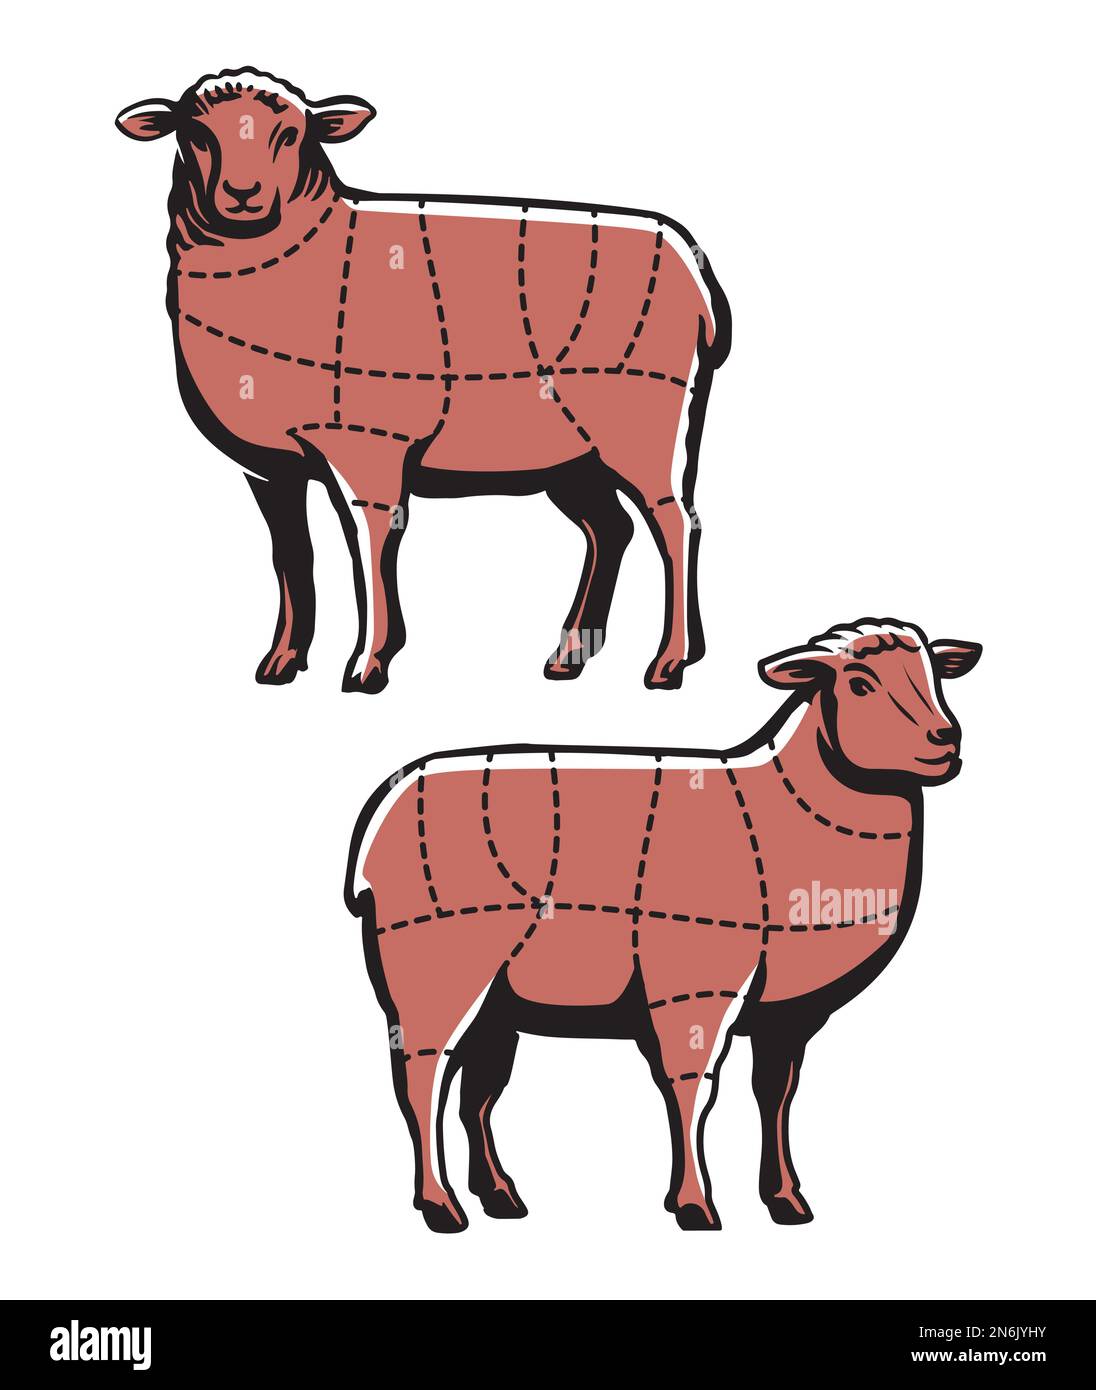 Lamb cutting. Sheep meat chart cut guide for butcher shop or restaurant. Butchery cuts diagram vector illustration Stock Vector